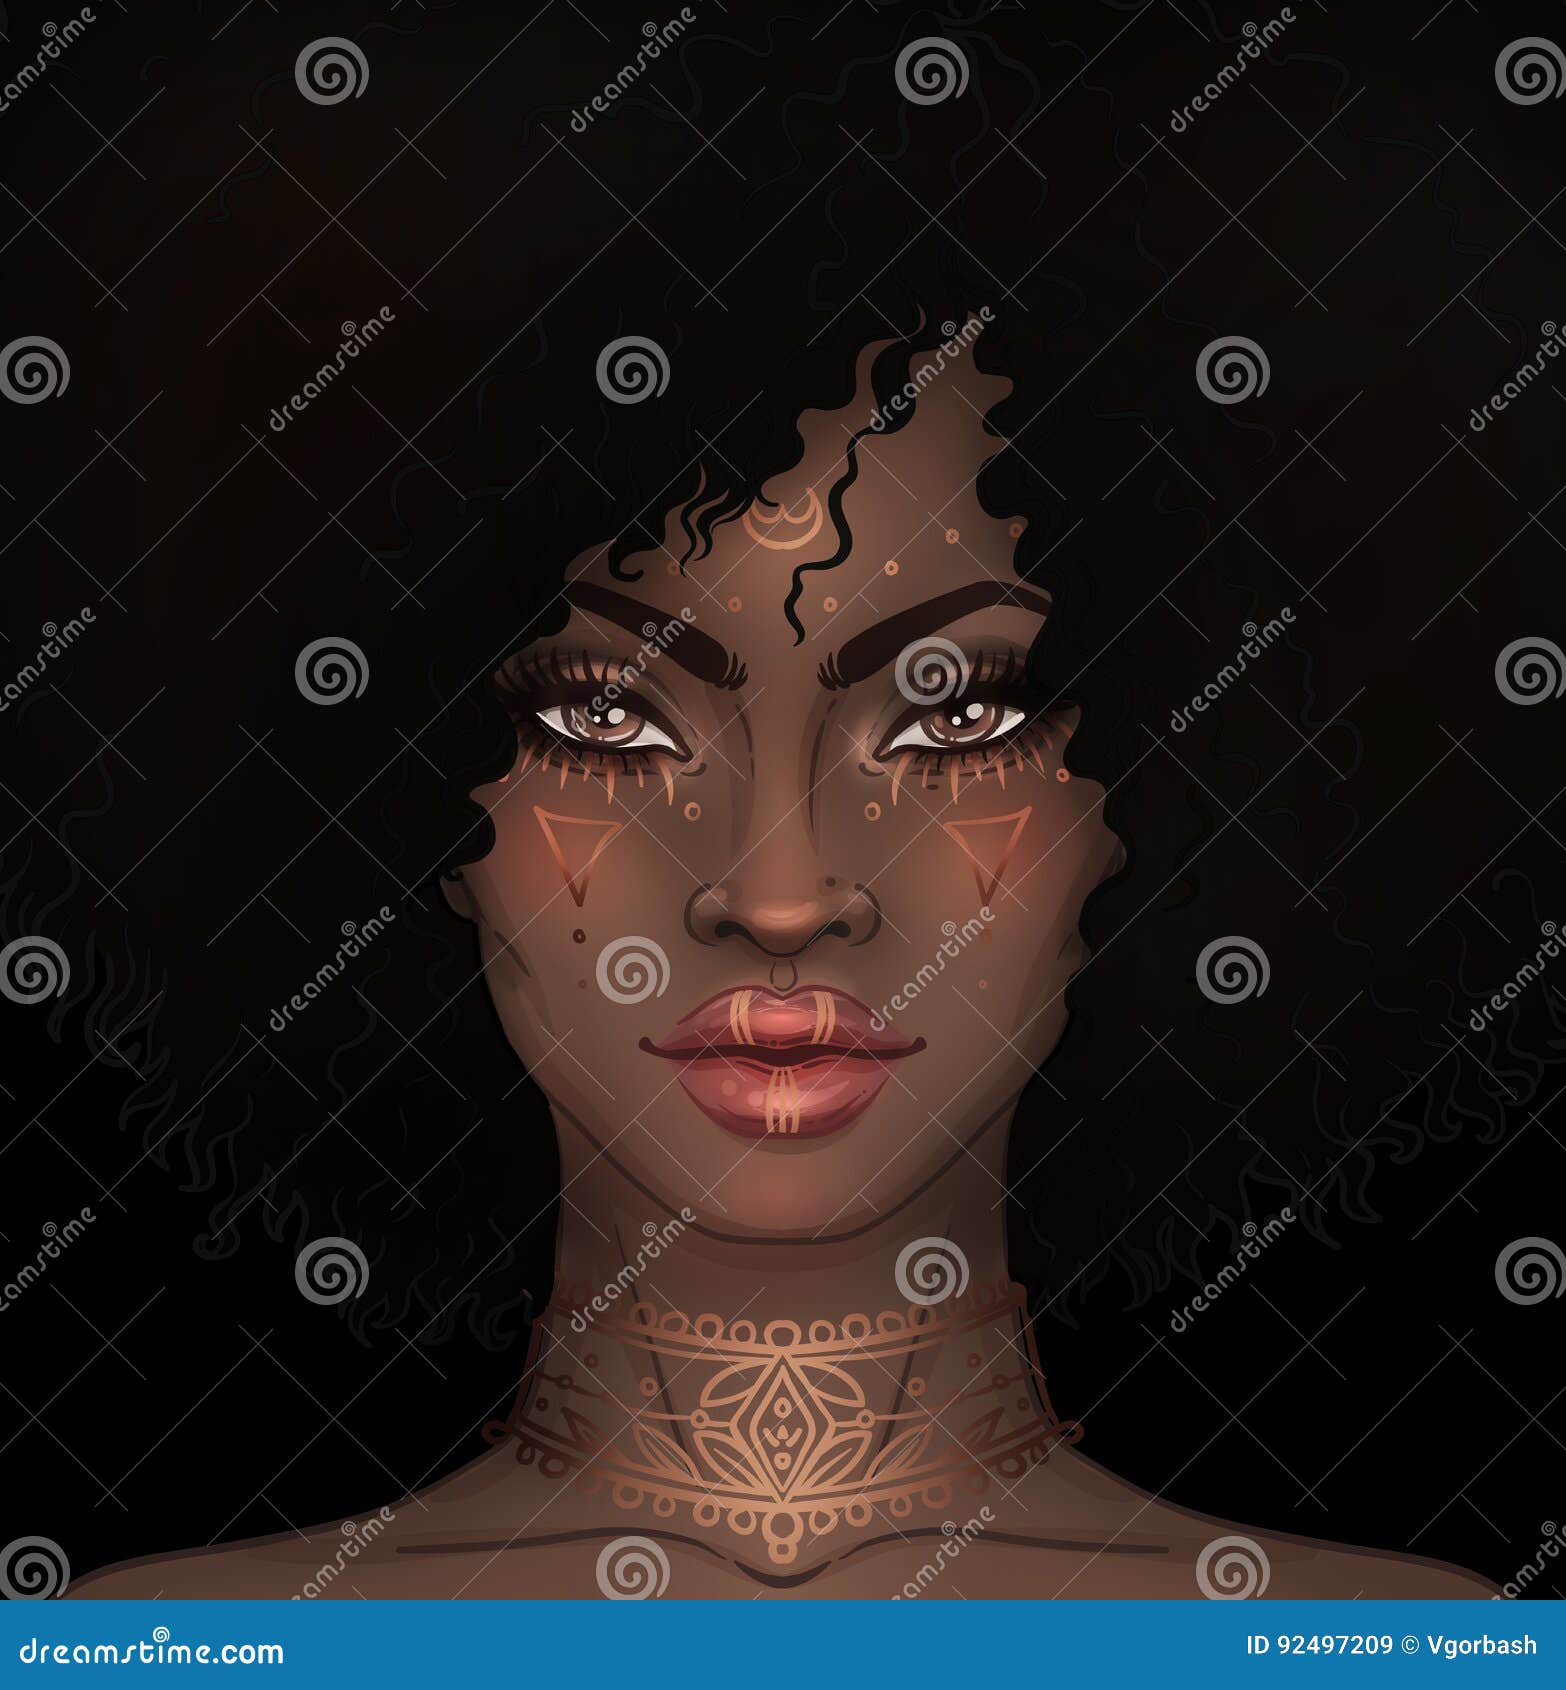 1402 Afro Girl Tattoo Images Stock Photos  Vectors  Shutterstock